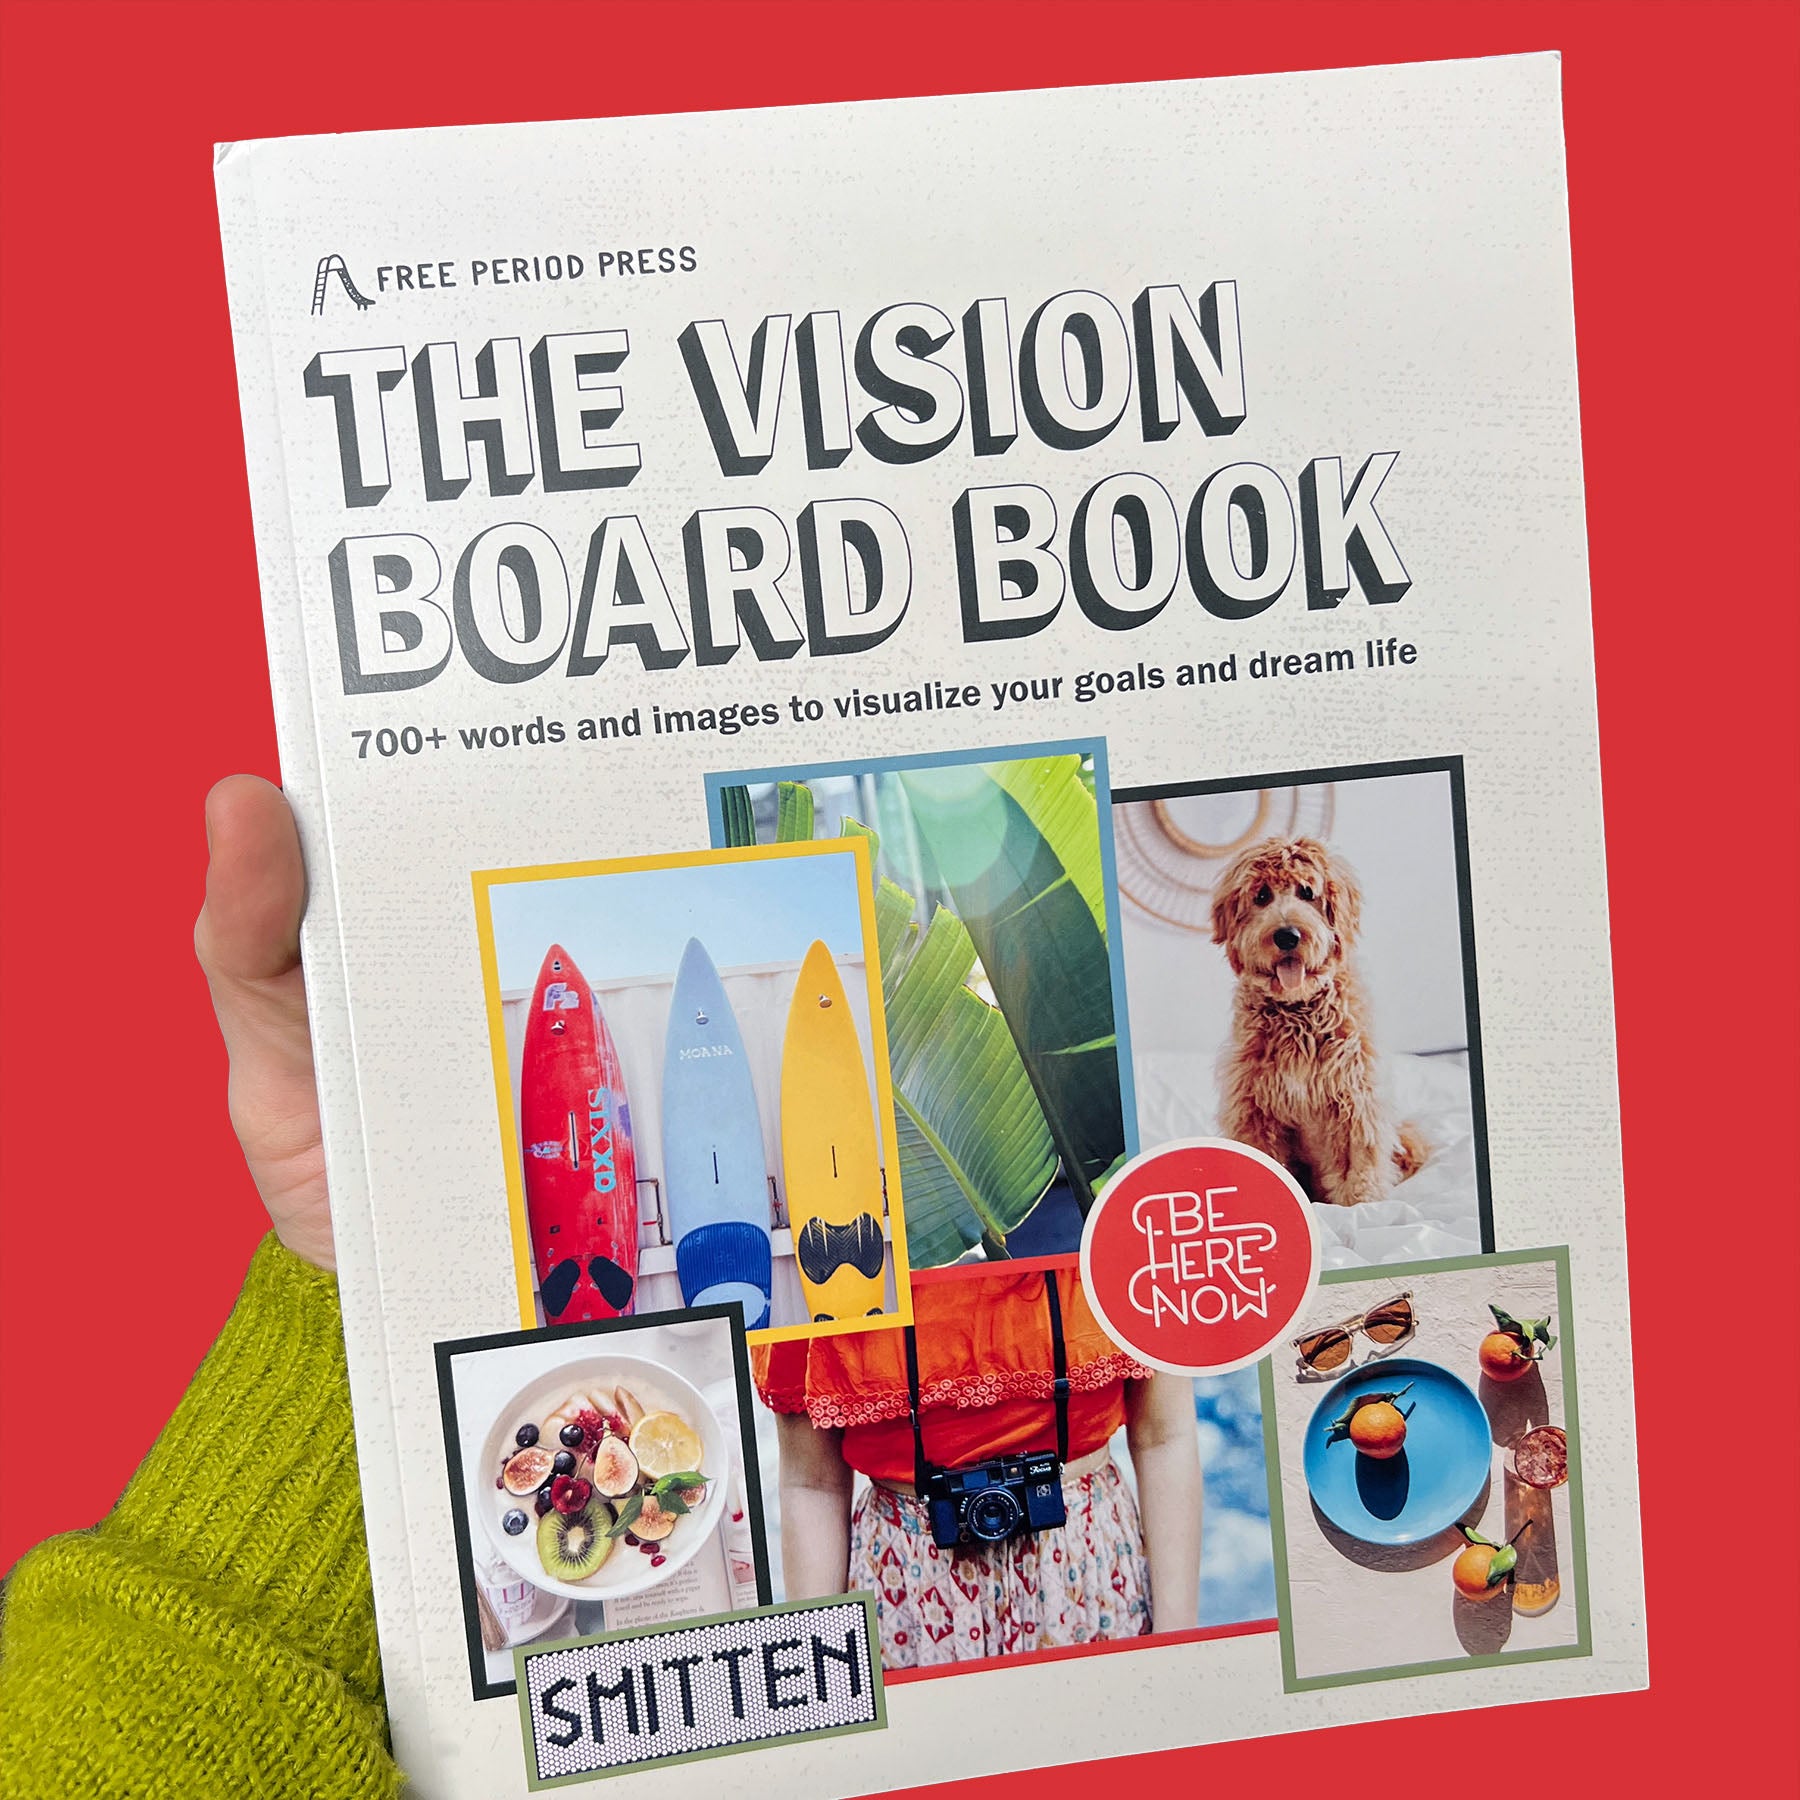 Vision Board… word art?! A book review 